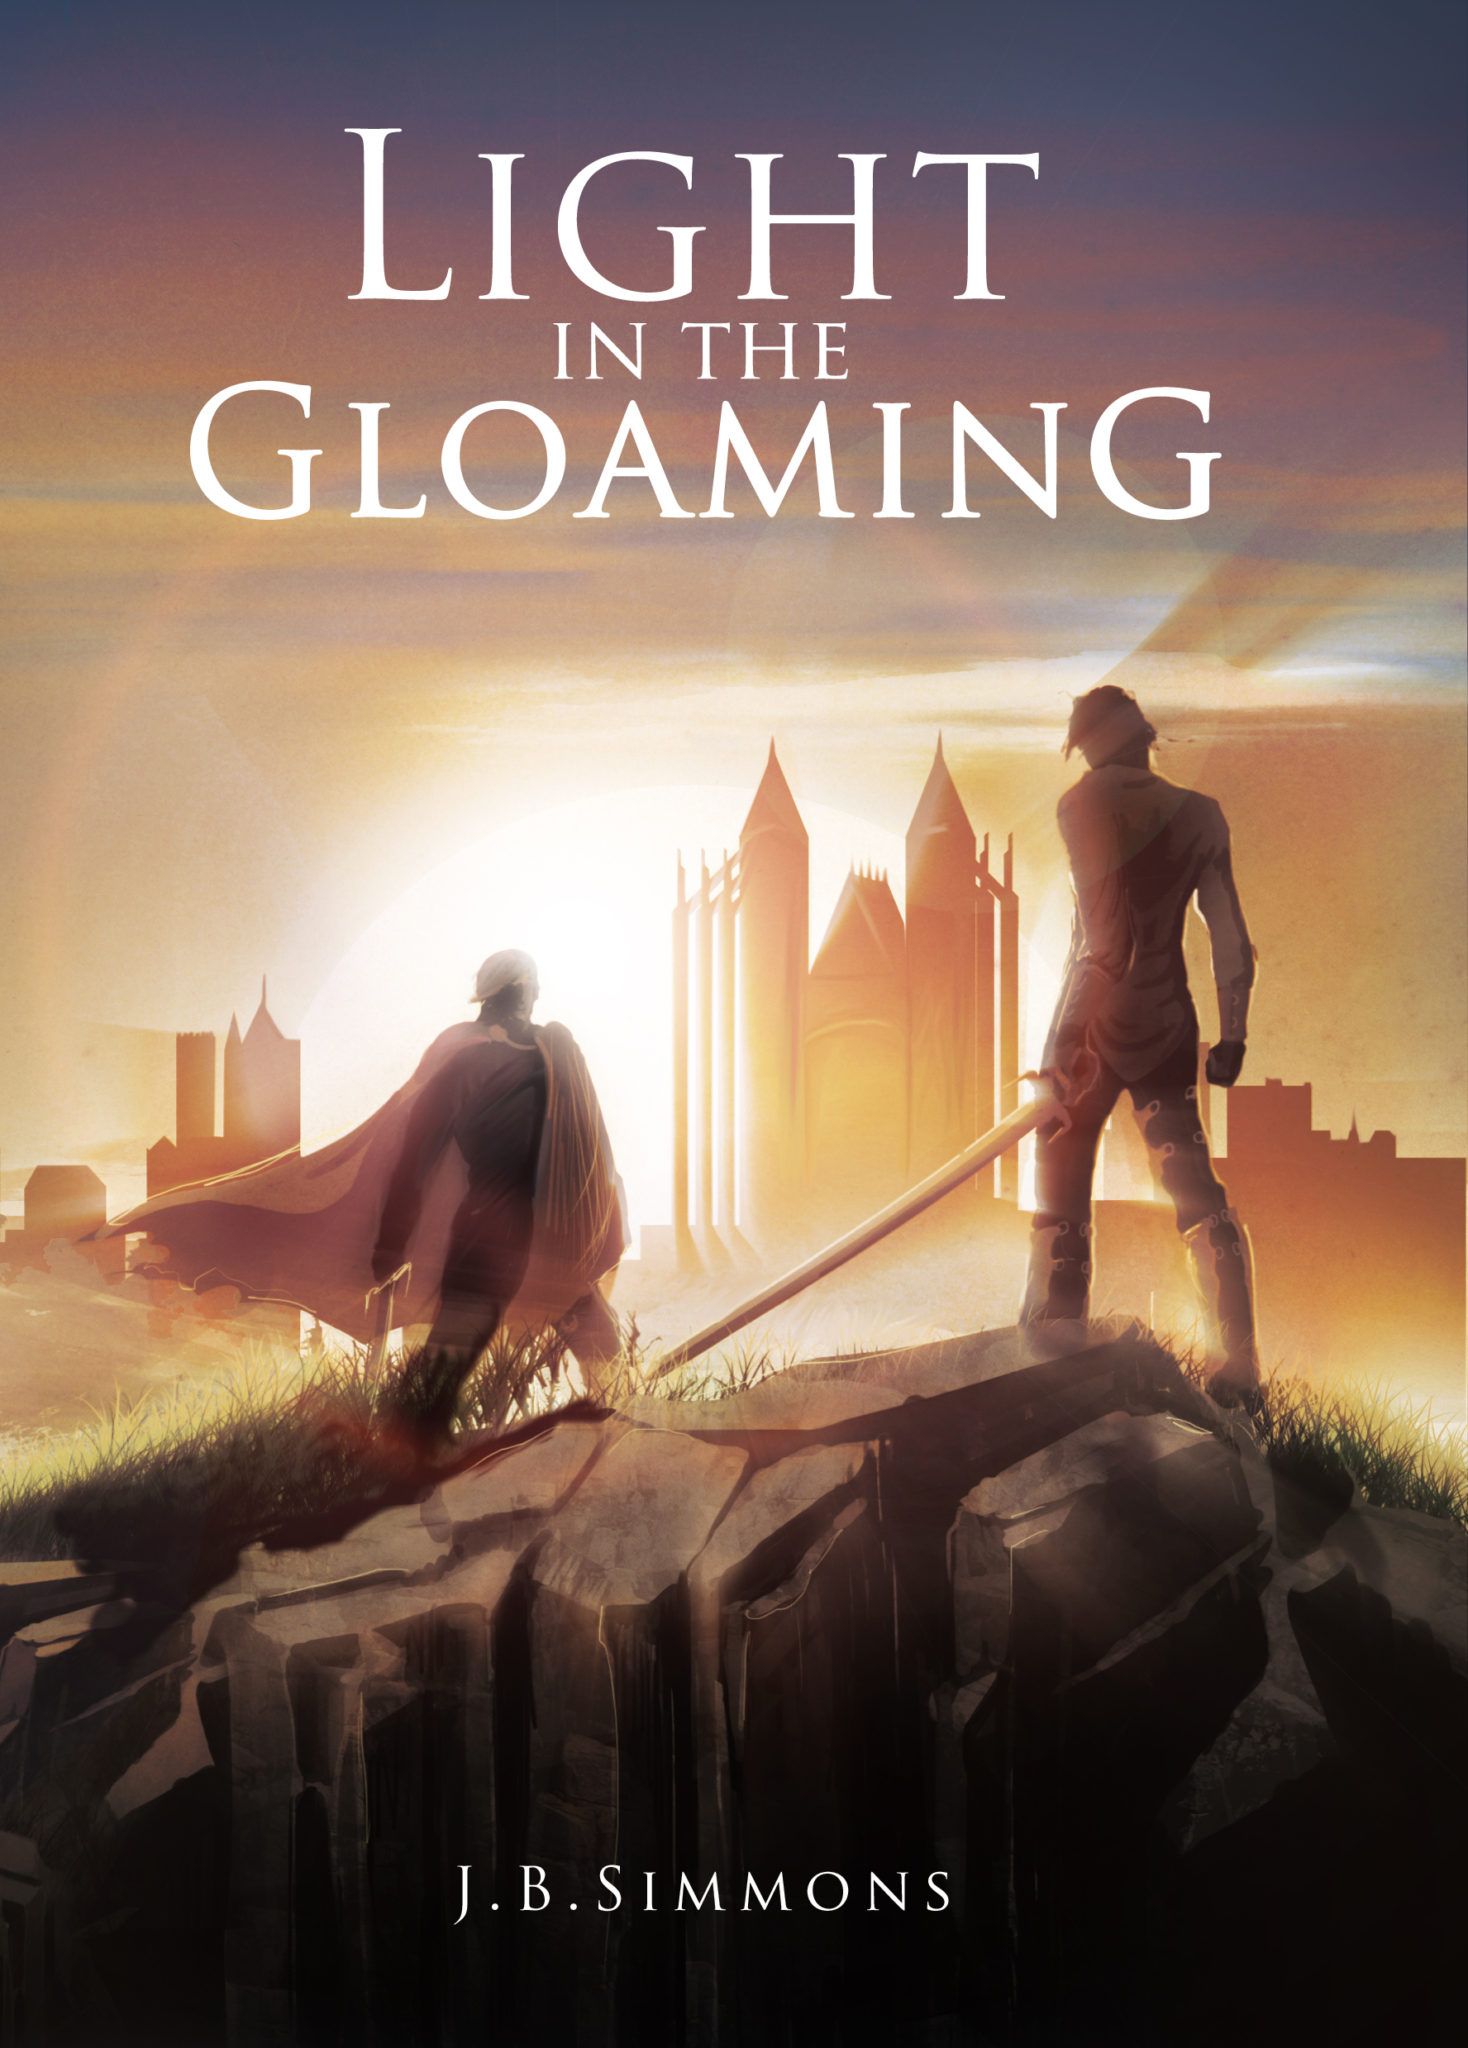 Light in the Gloaming by J.B. Simmons